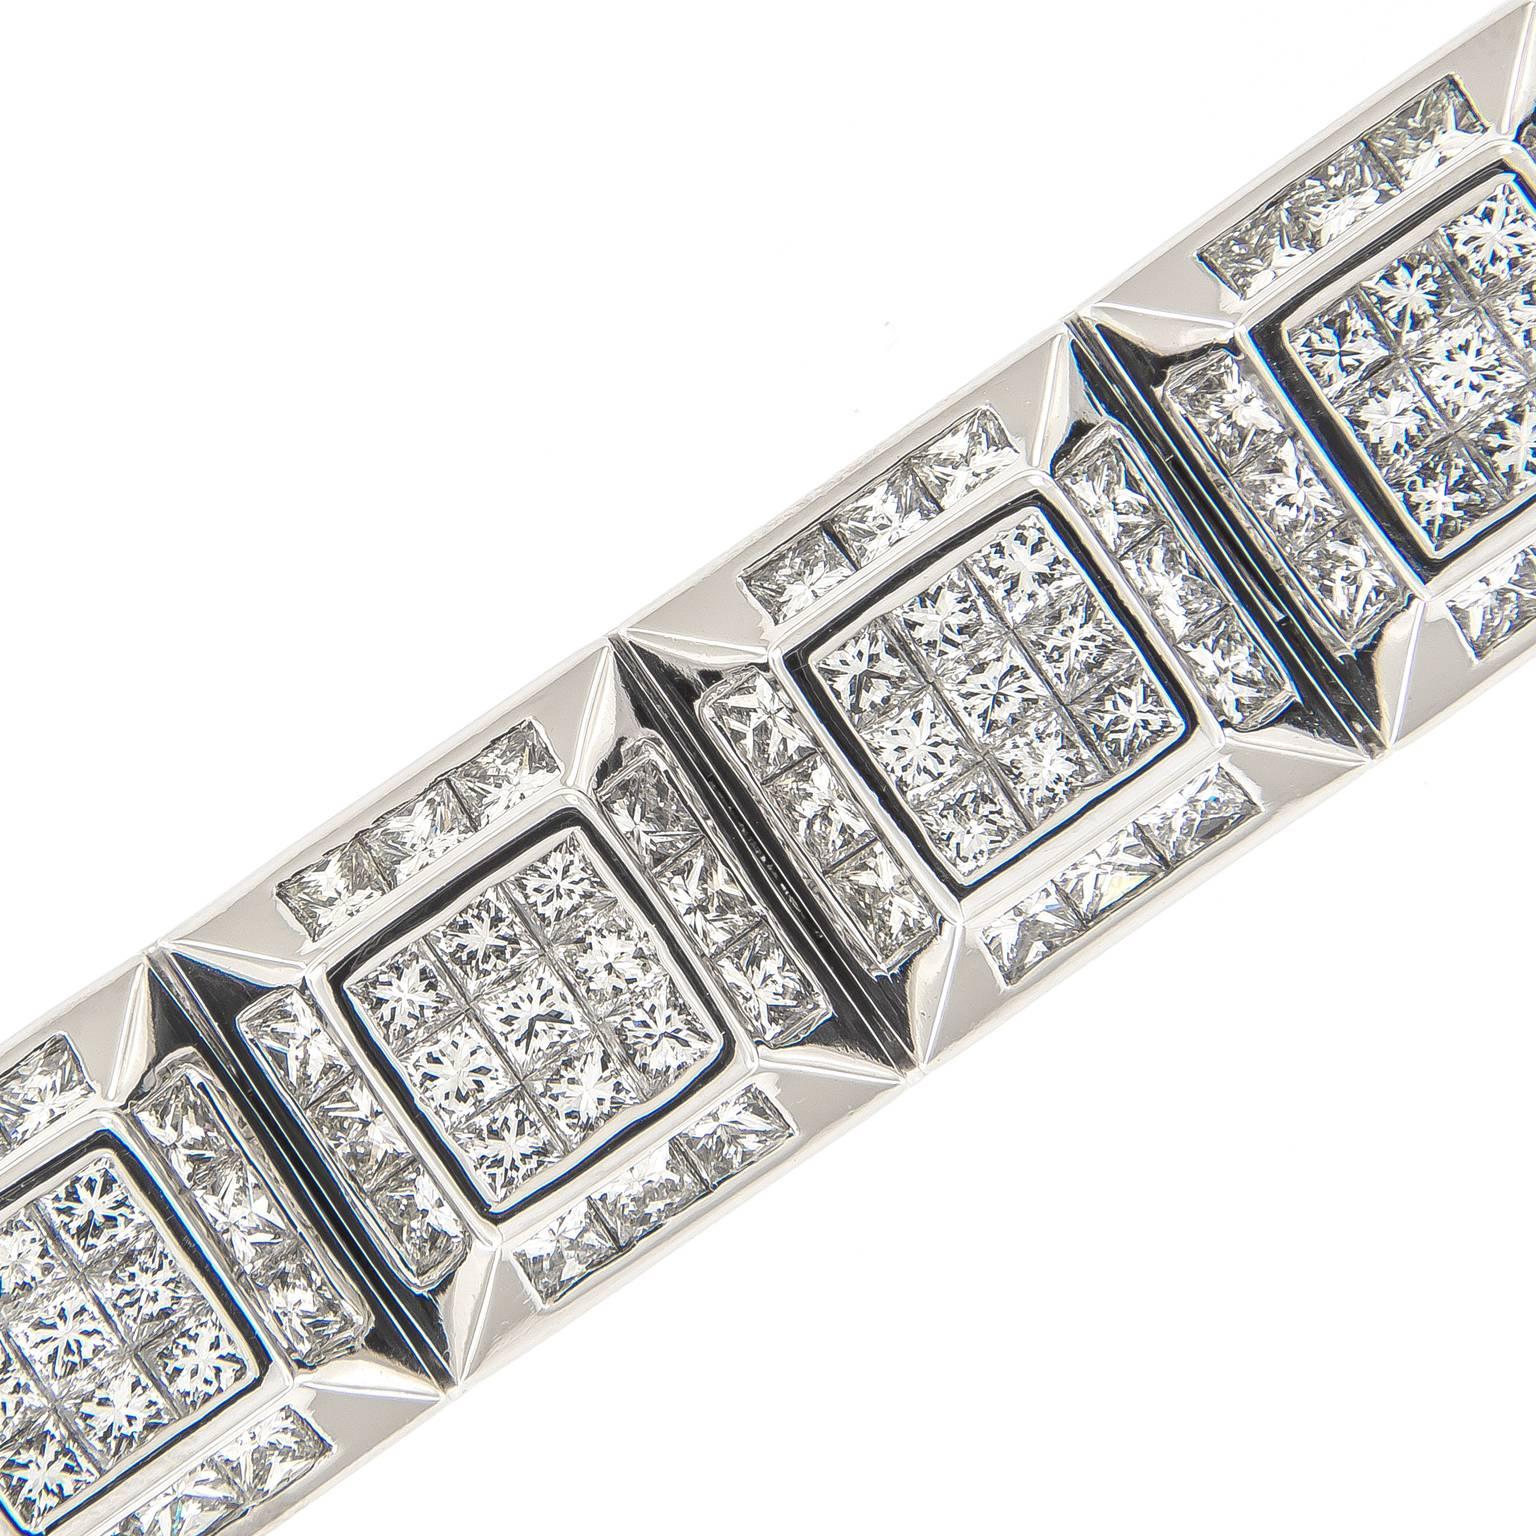 Striking diamond bracelet is a masterpiece of luxury and fashion. 19.74cttw of diamonds set in 18k white gold ice-cube link design. Weighs 75.4 grams. 
Length 7.25 in (18.415)
Diamonds 19.74cttw. VS2/SI2 GH